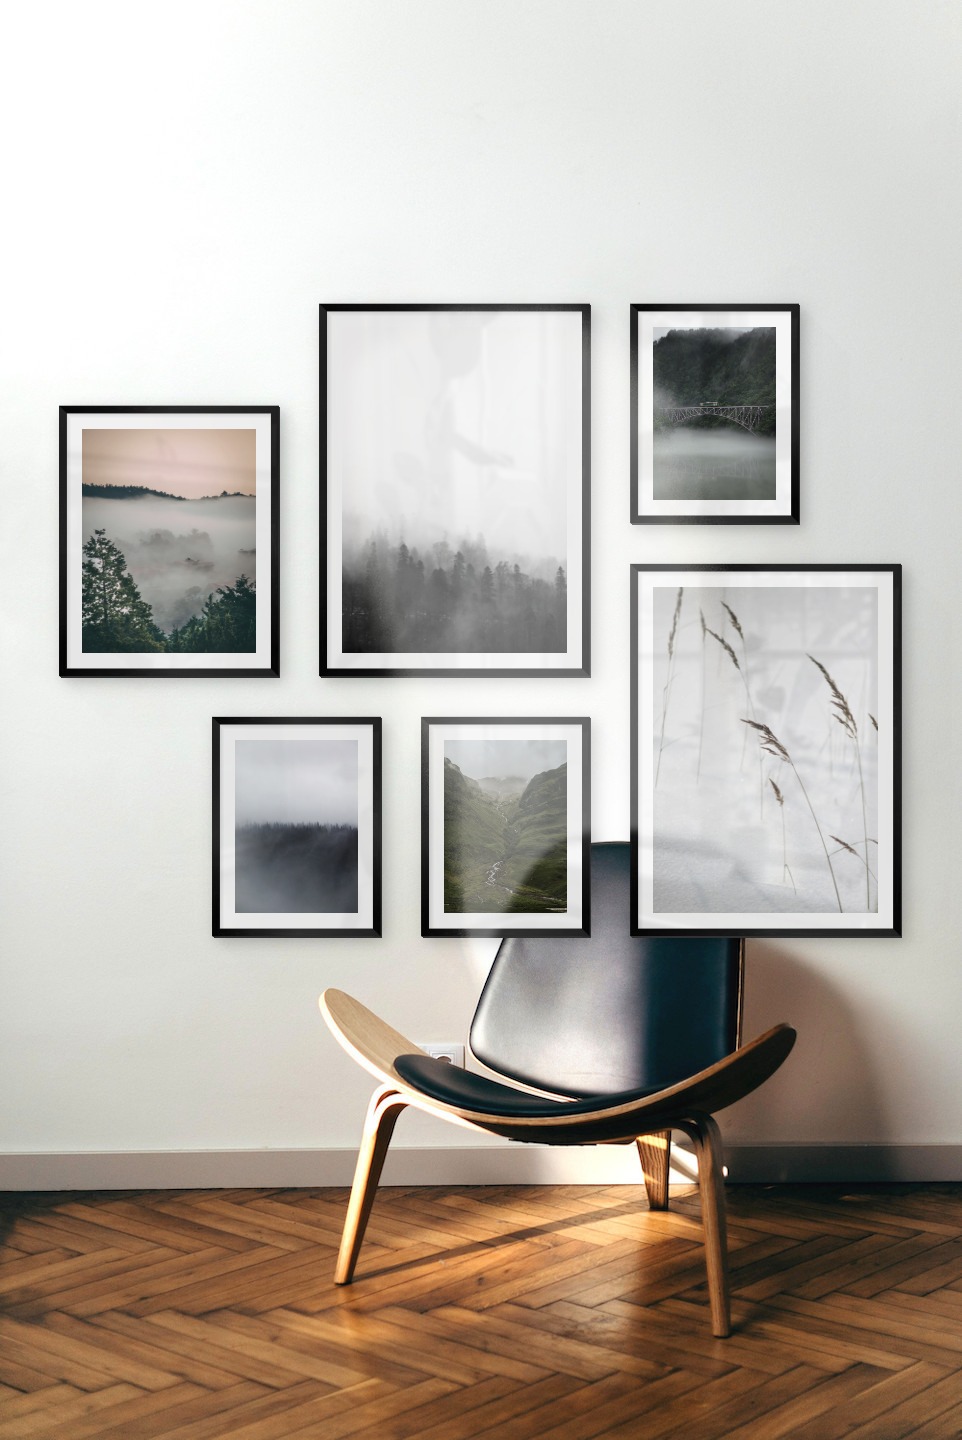 Gallery wall with picture frames in black in sizes 40x50, 50x70 and 30x40 with prints "Wooden tops and orange sky", "Foggy wooden tops", "Fog over treetops", "Stream in valley", "Sharp in the snow" and "Train over bridge"